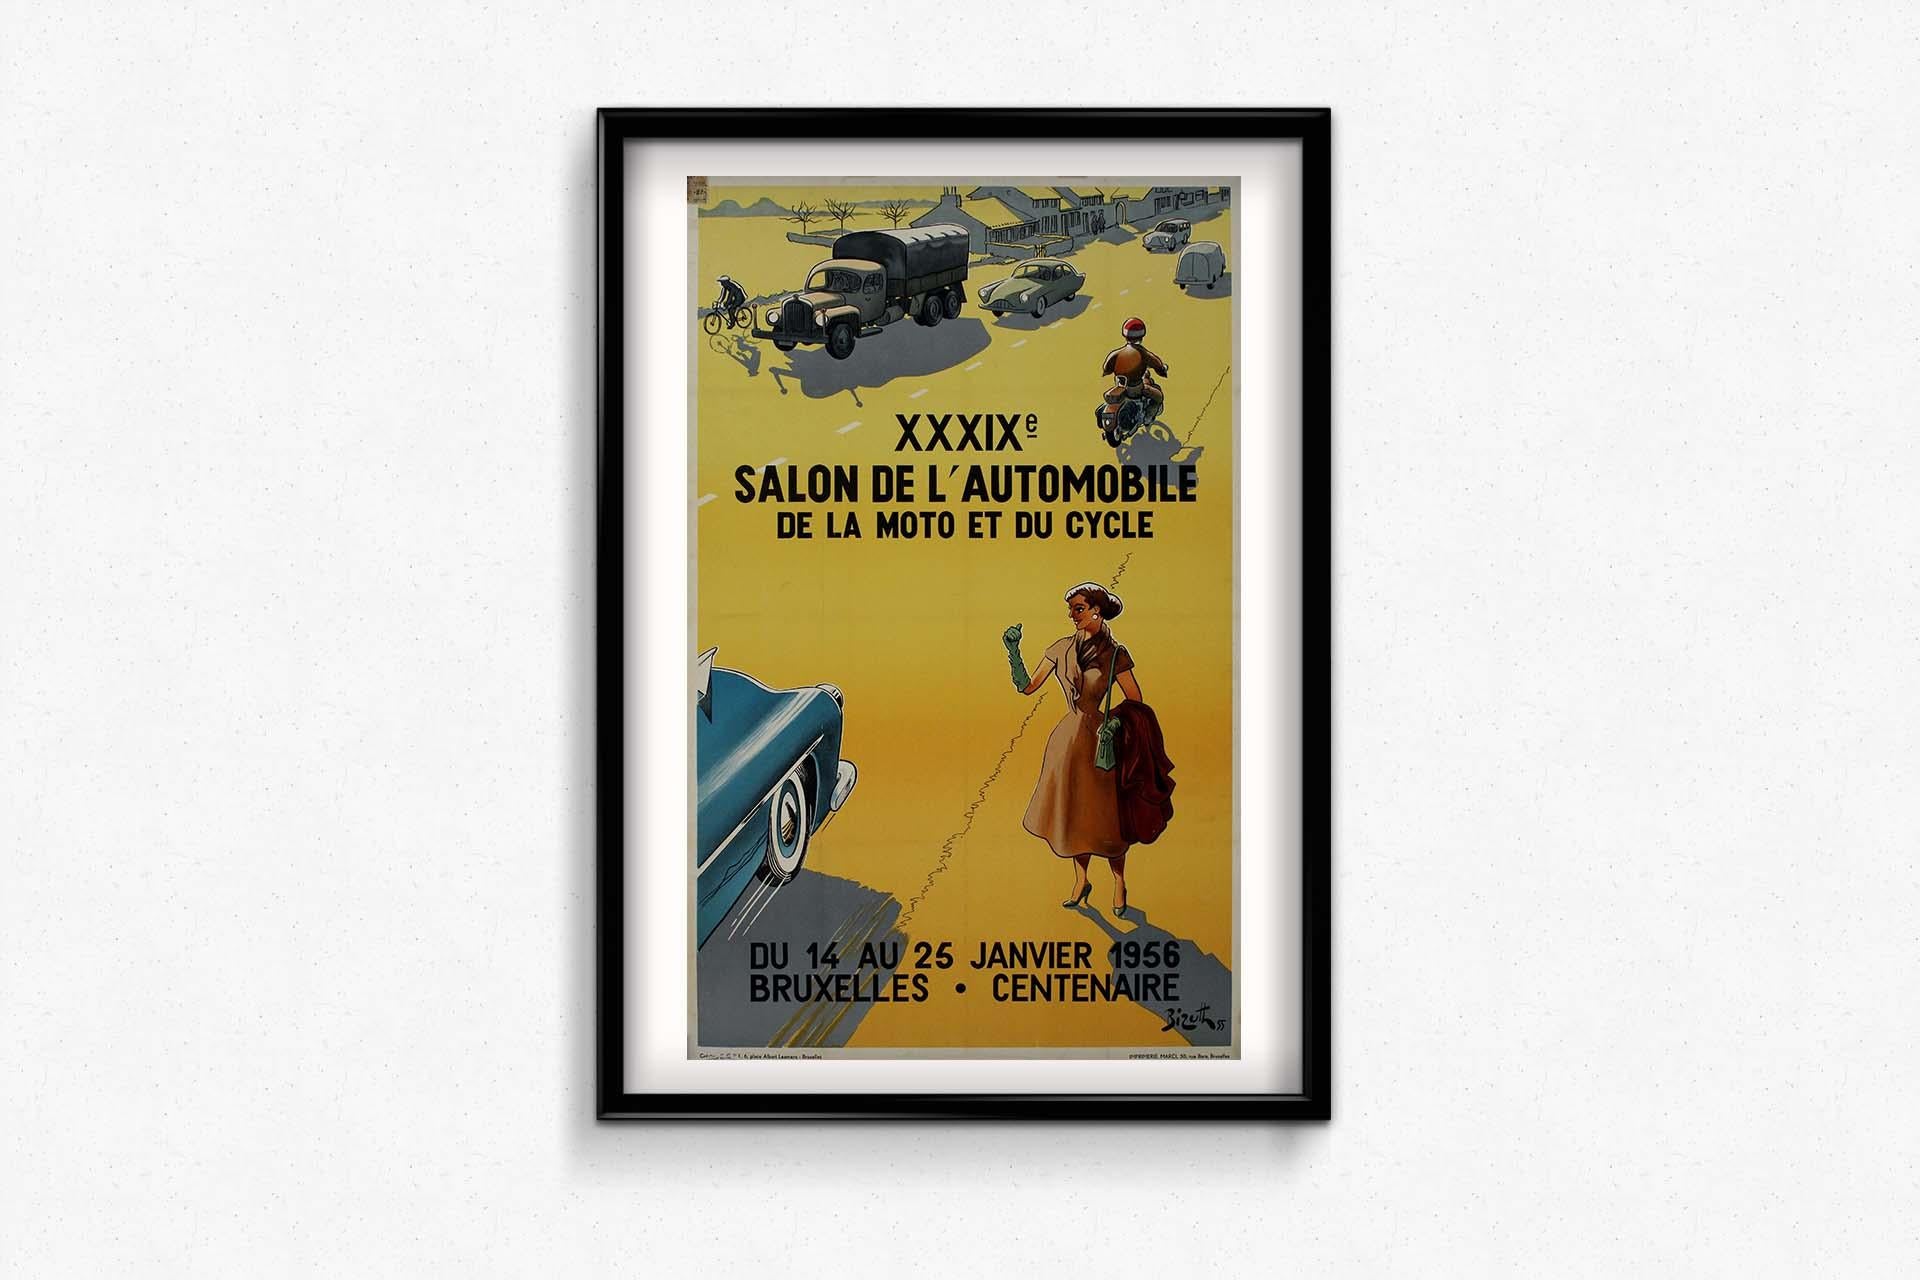 The XXXIXe Salon de l'Automobile, de la Moto et du Cycle held in Bruxelles in 1956 stood as a celebration of innovation, design, and the boundless possibilities of the open road. At the heart of this dynamic event was the captivating poster crafted